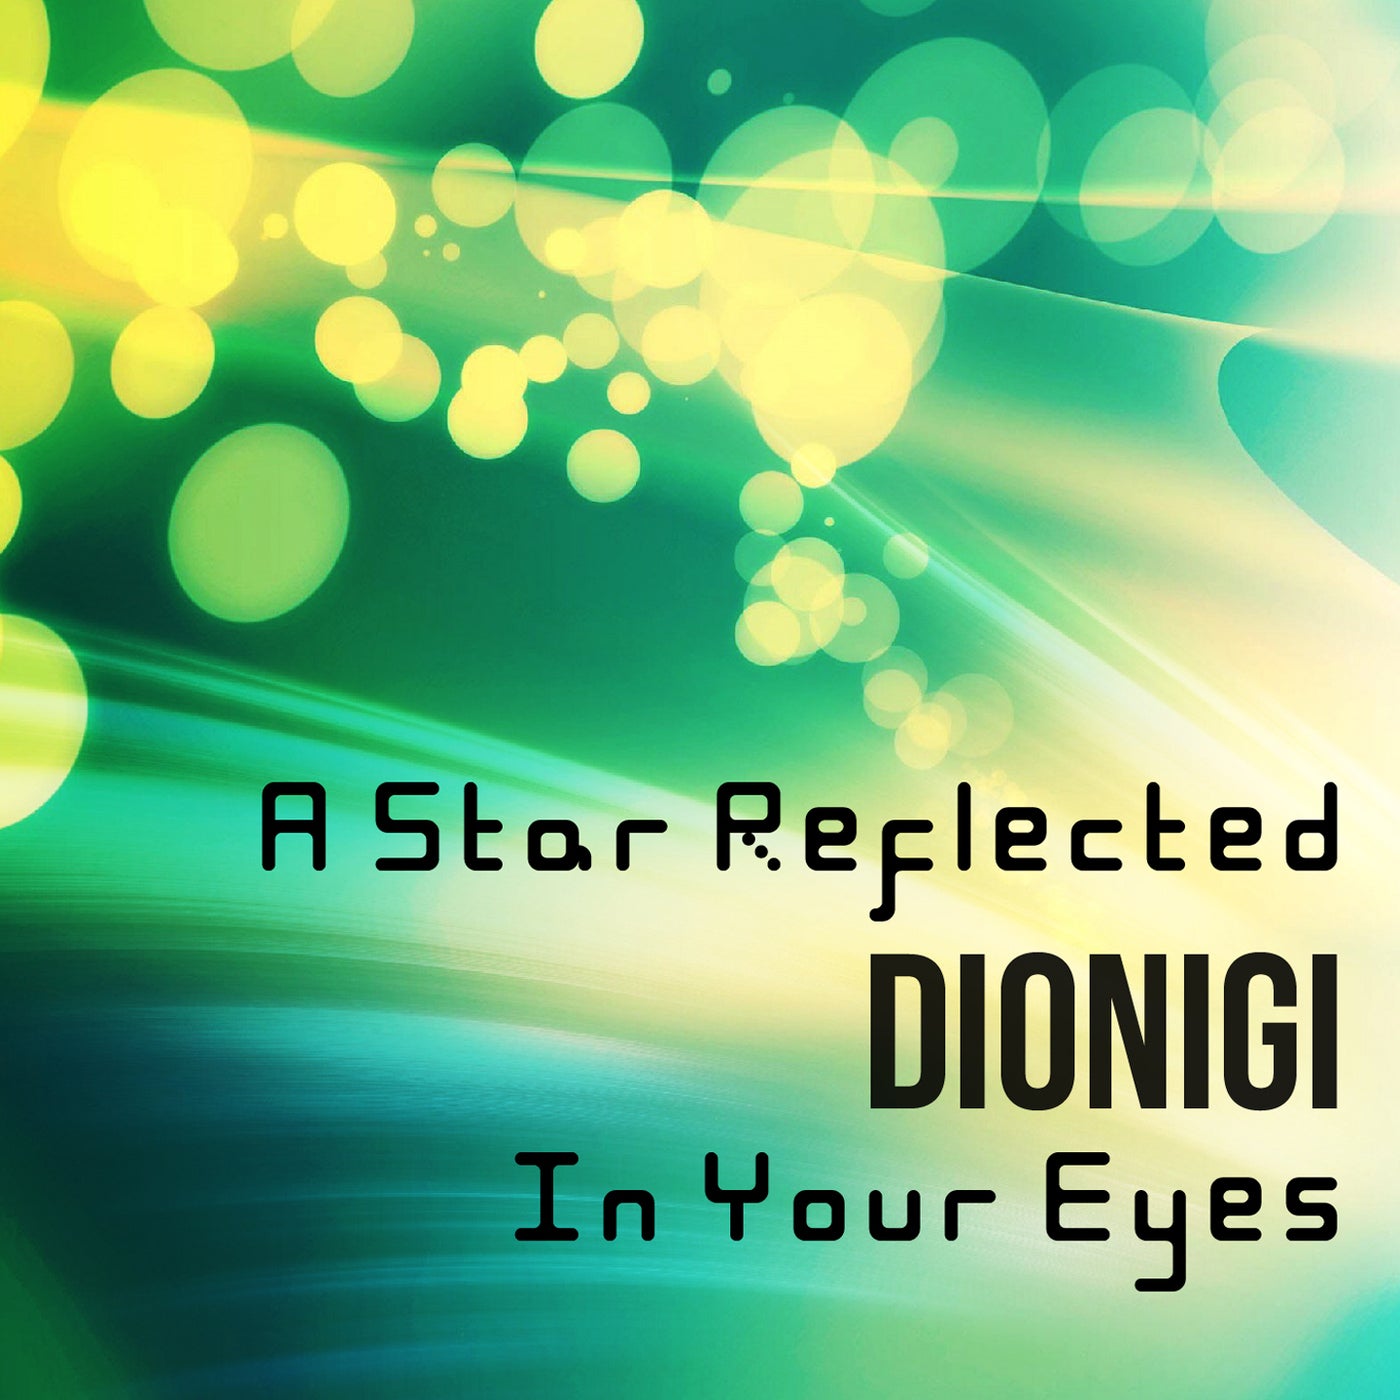 A Star Reflected in Your Eyes